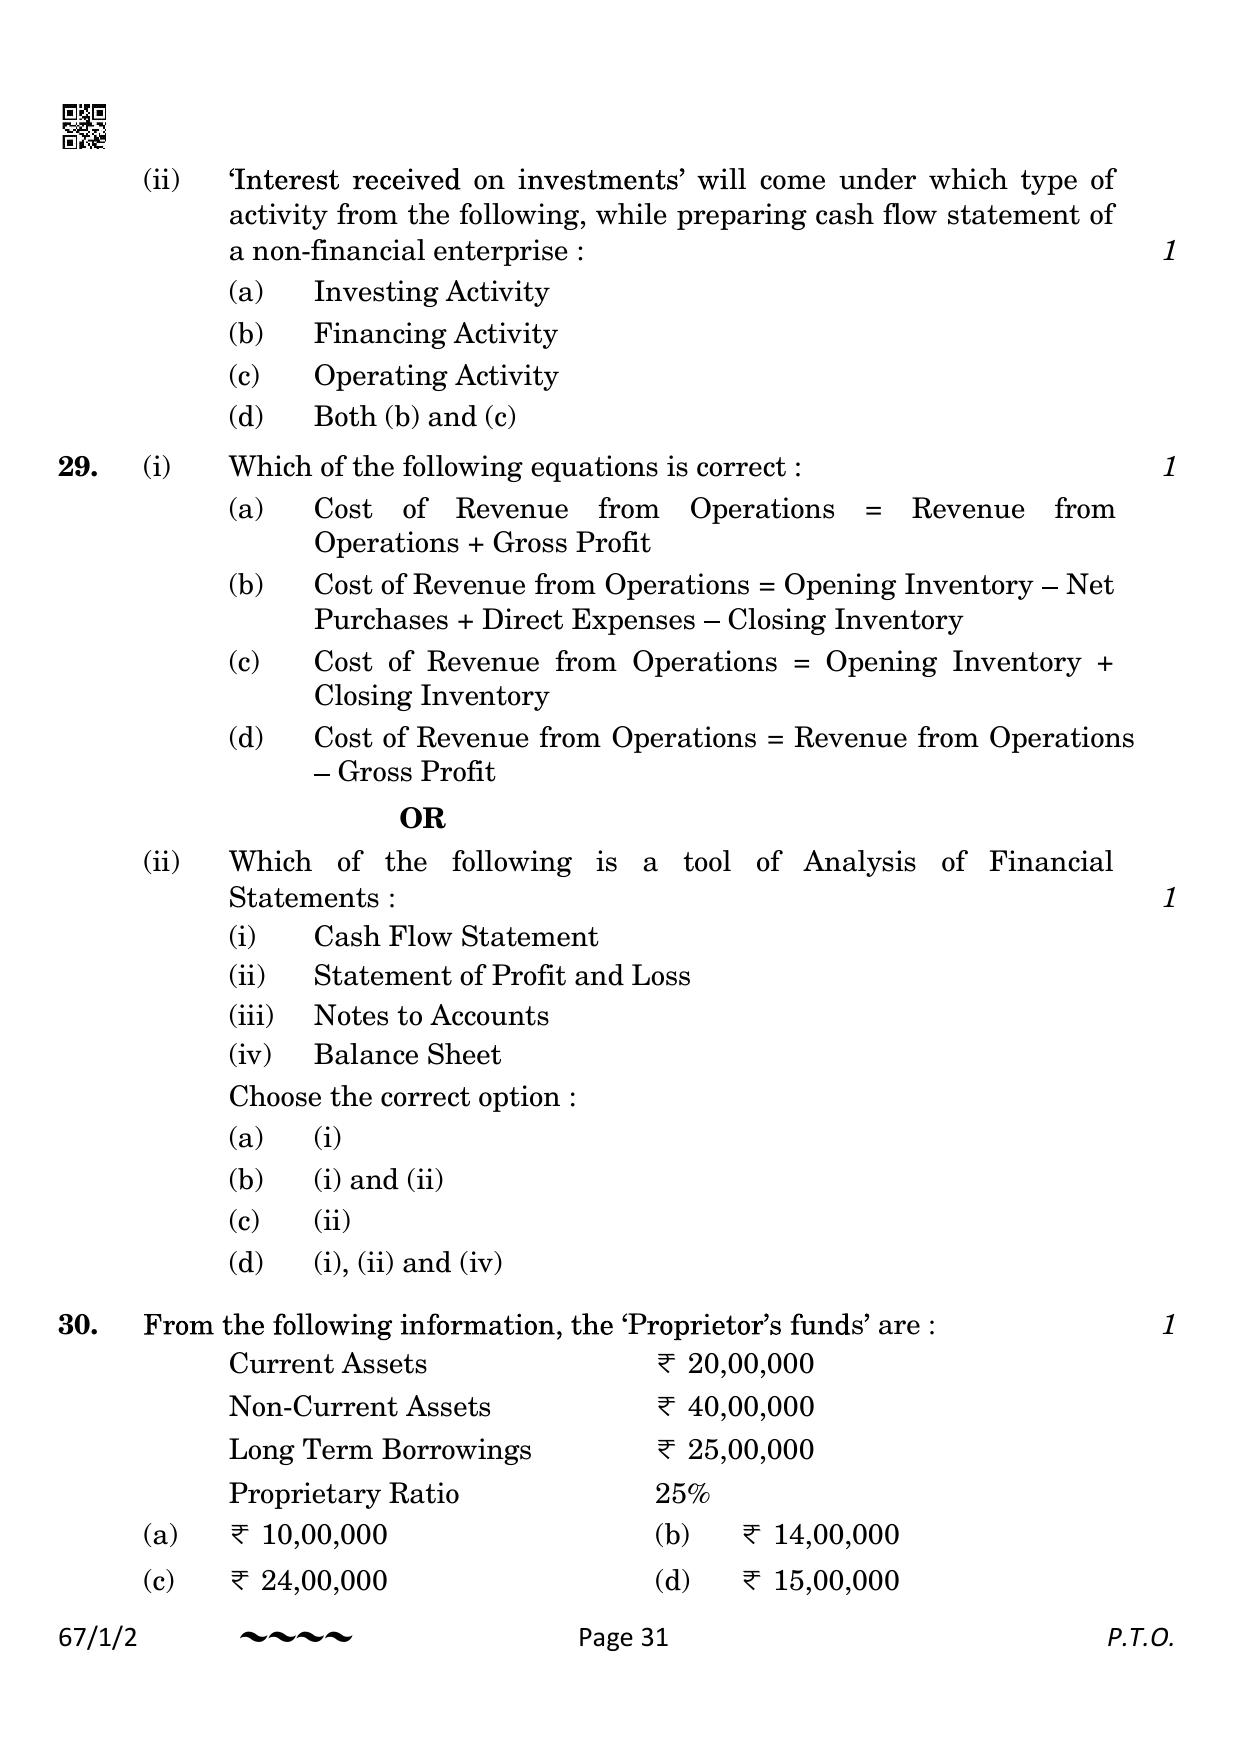 CBSE Class 12 67-1-2 Accountancy 2023 Question Paper - Page 31